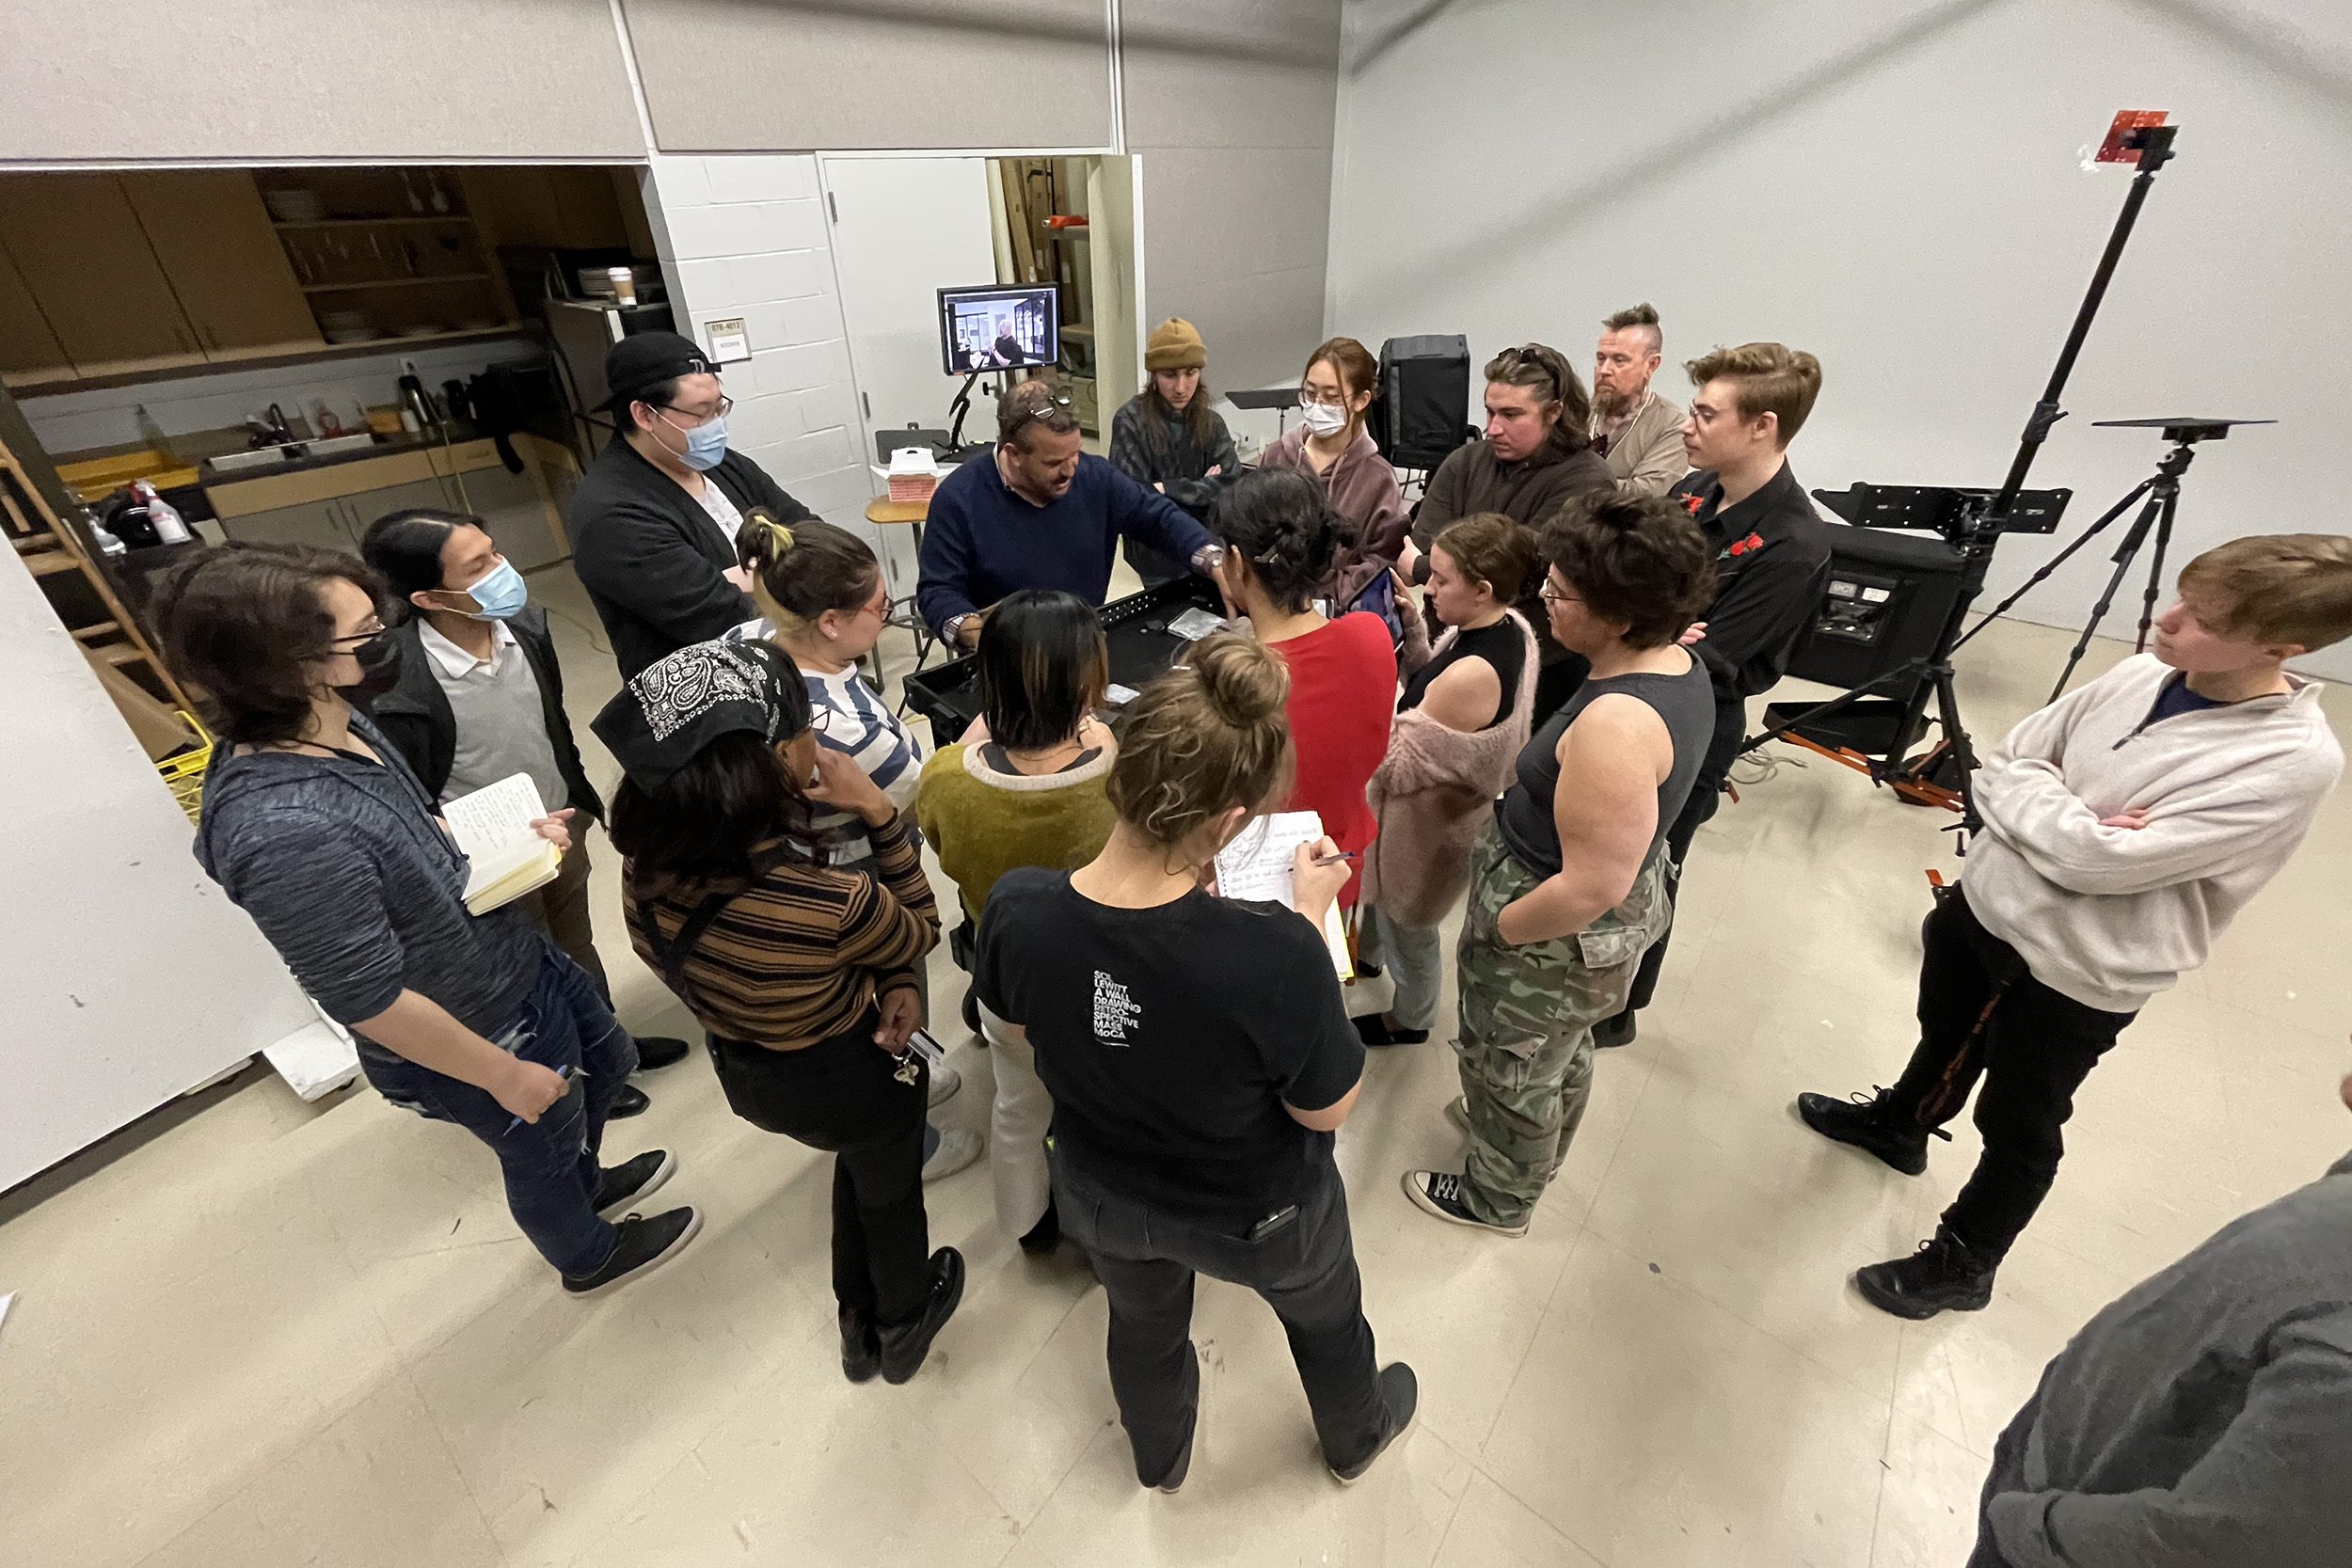 A group of students and instructors look at high-tech studio photography equipment.